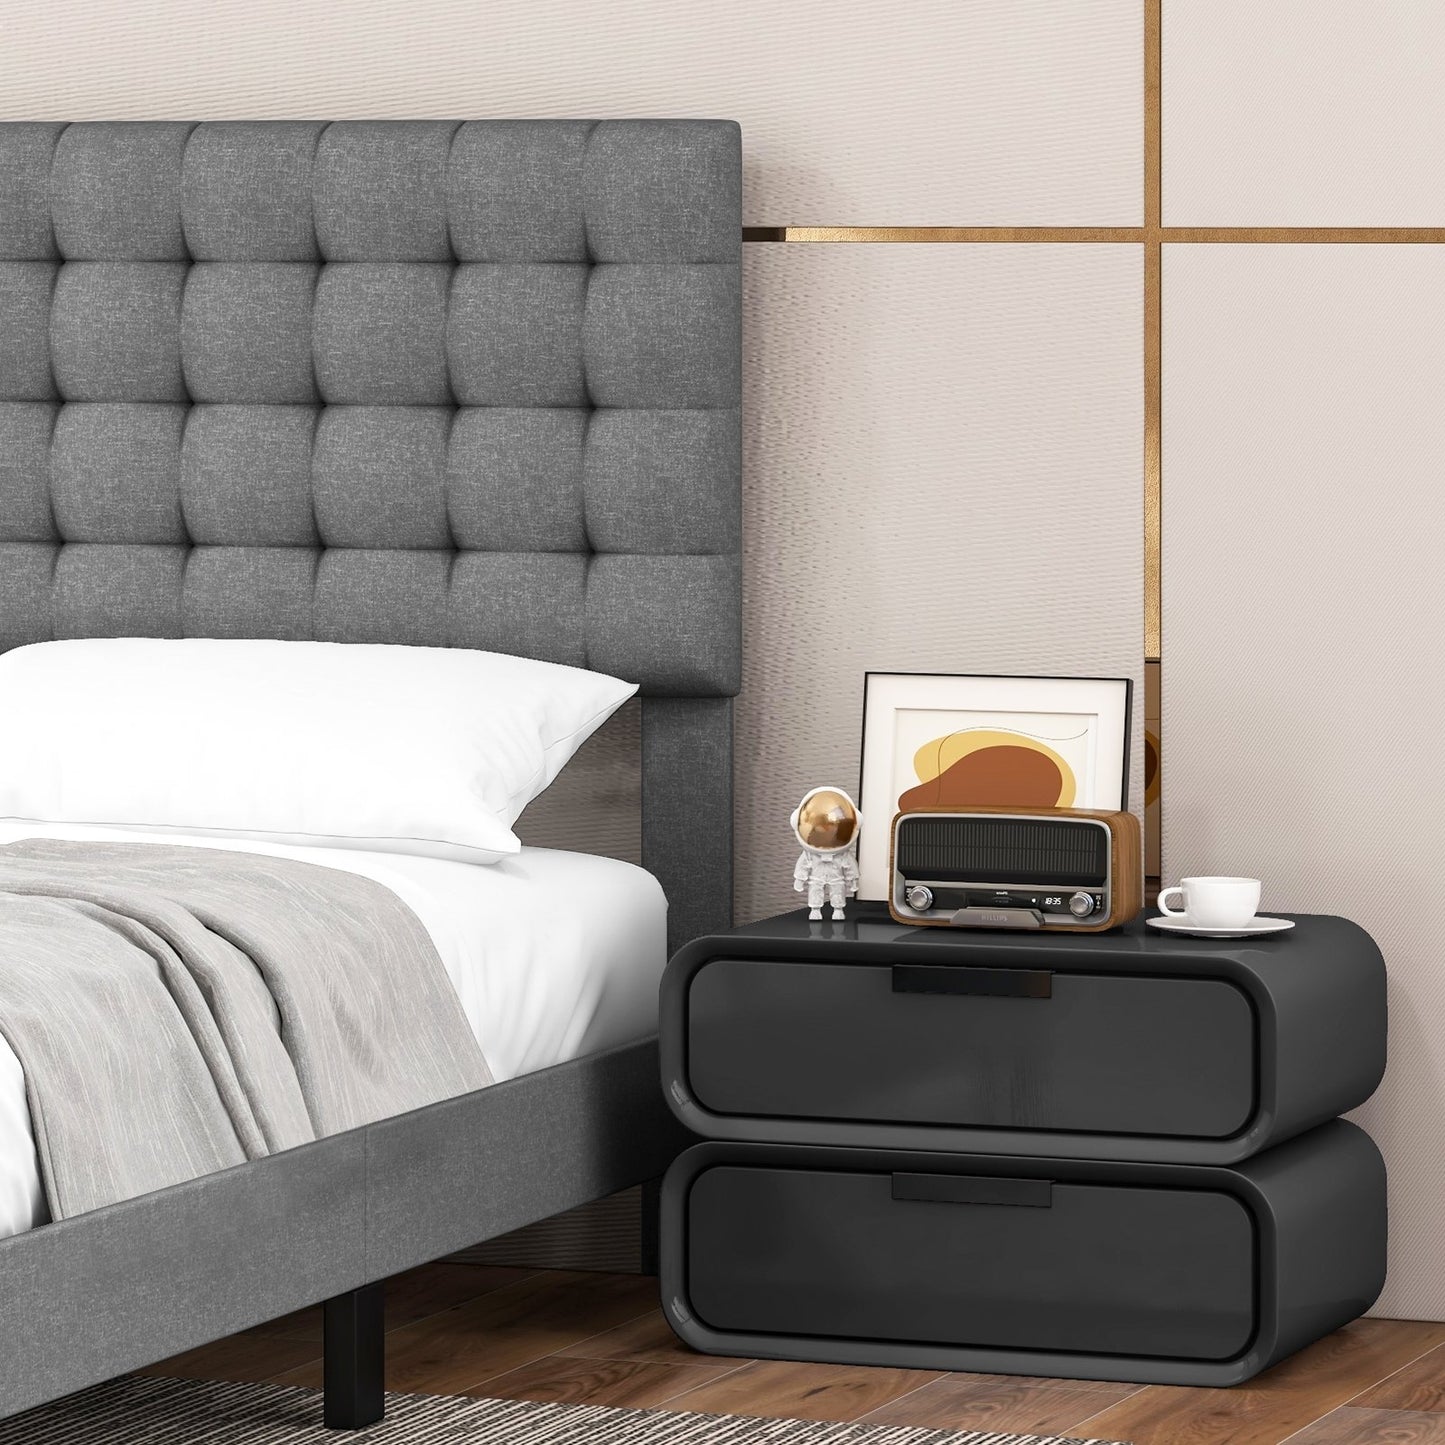 Queen Size Upholstered Platform Bed with Square Stitched Headboard